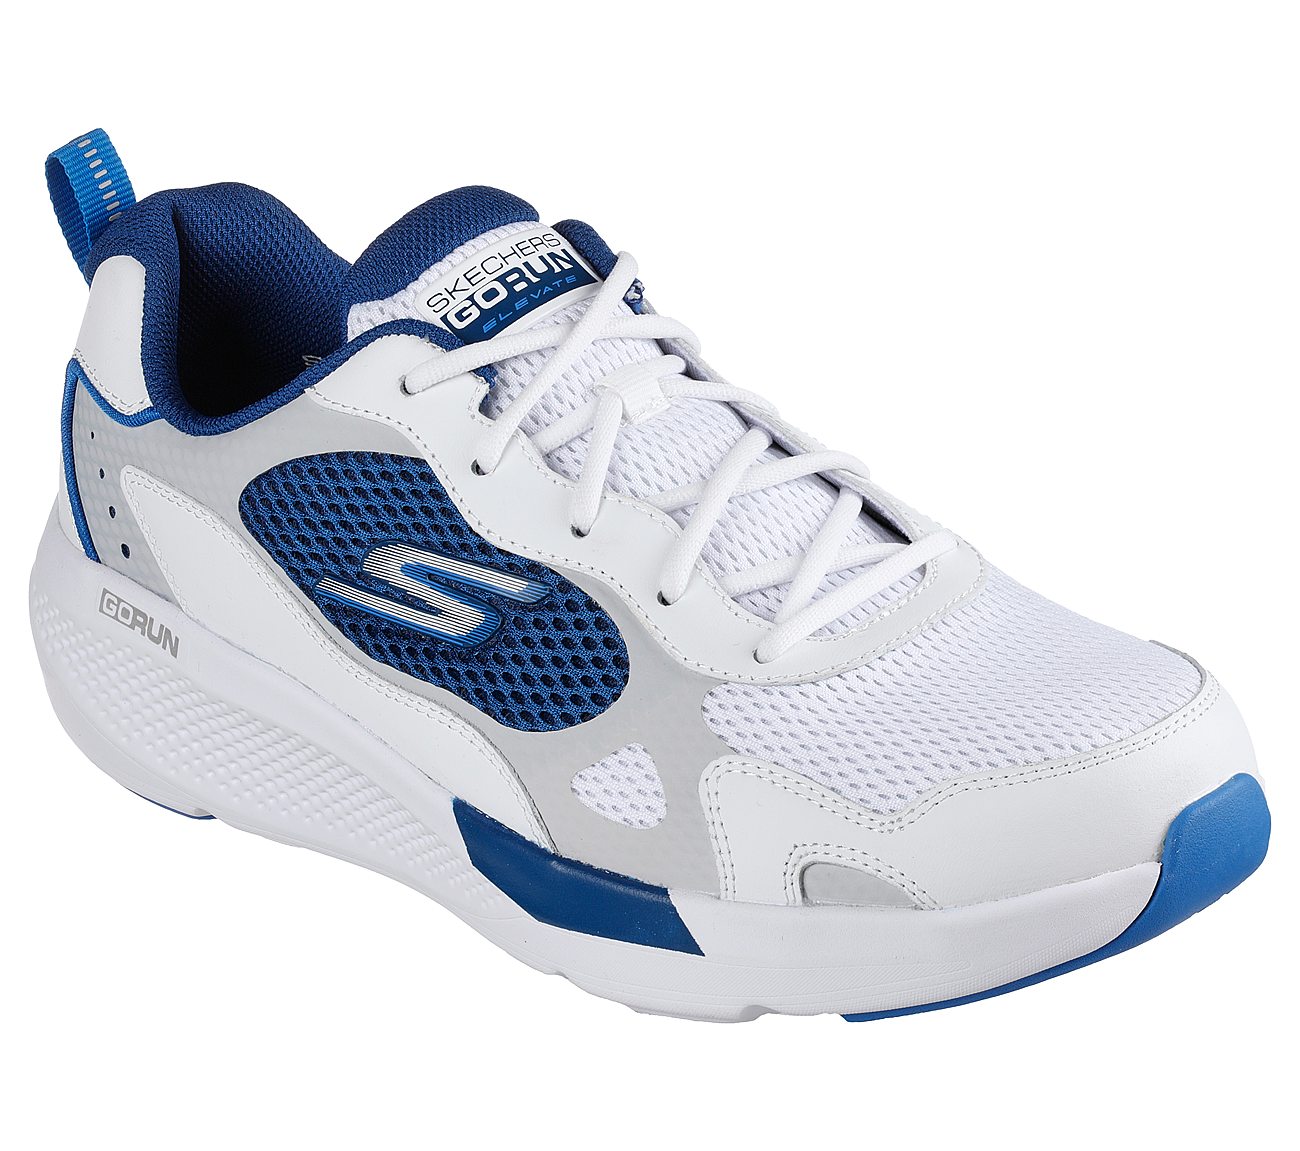 GO RUN ELEVATE - NANDAYUS, WHITE/NAVY Footwear Right View